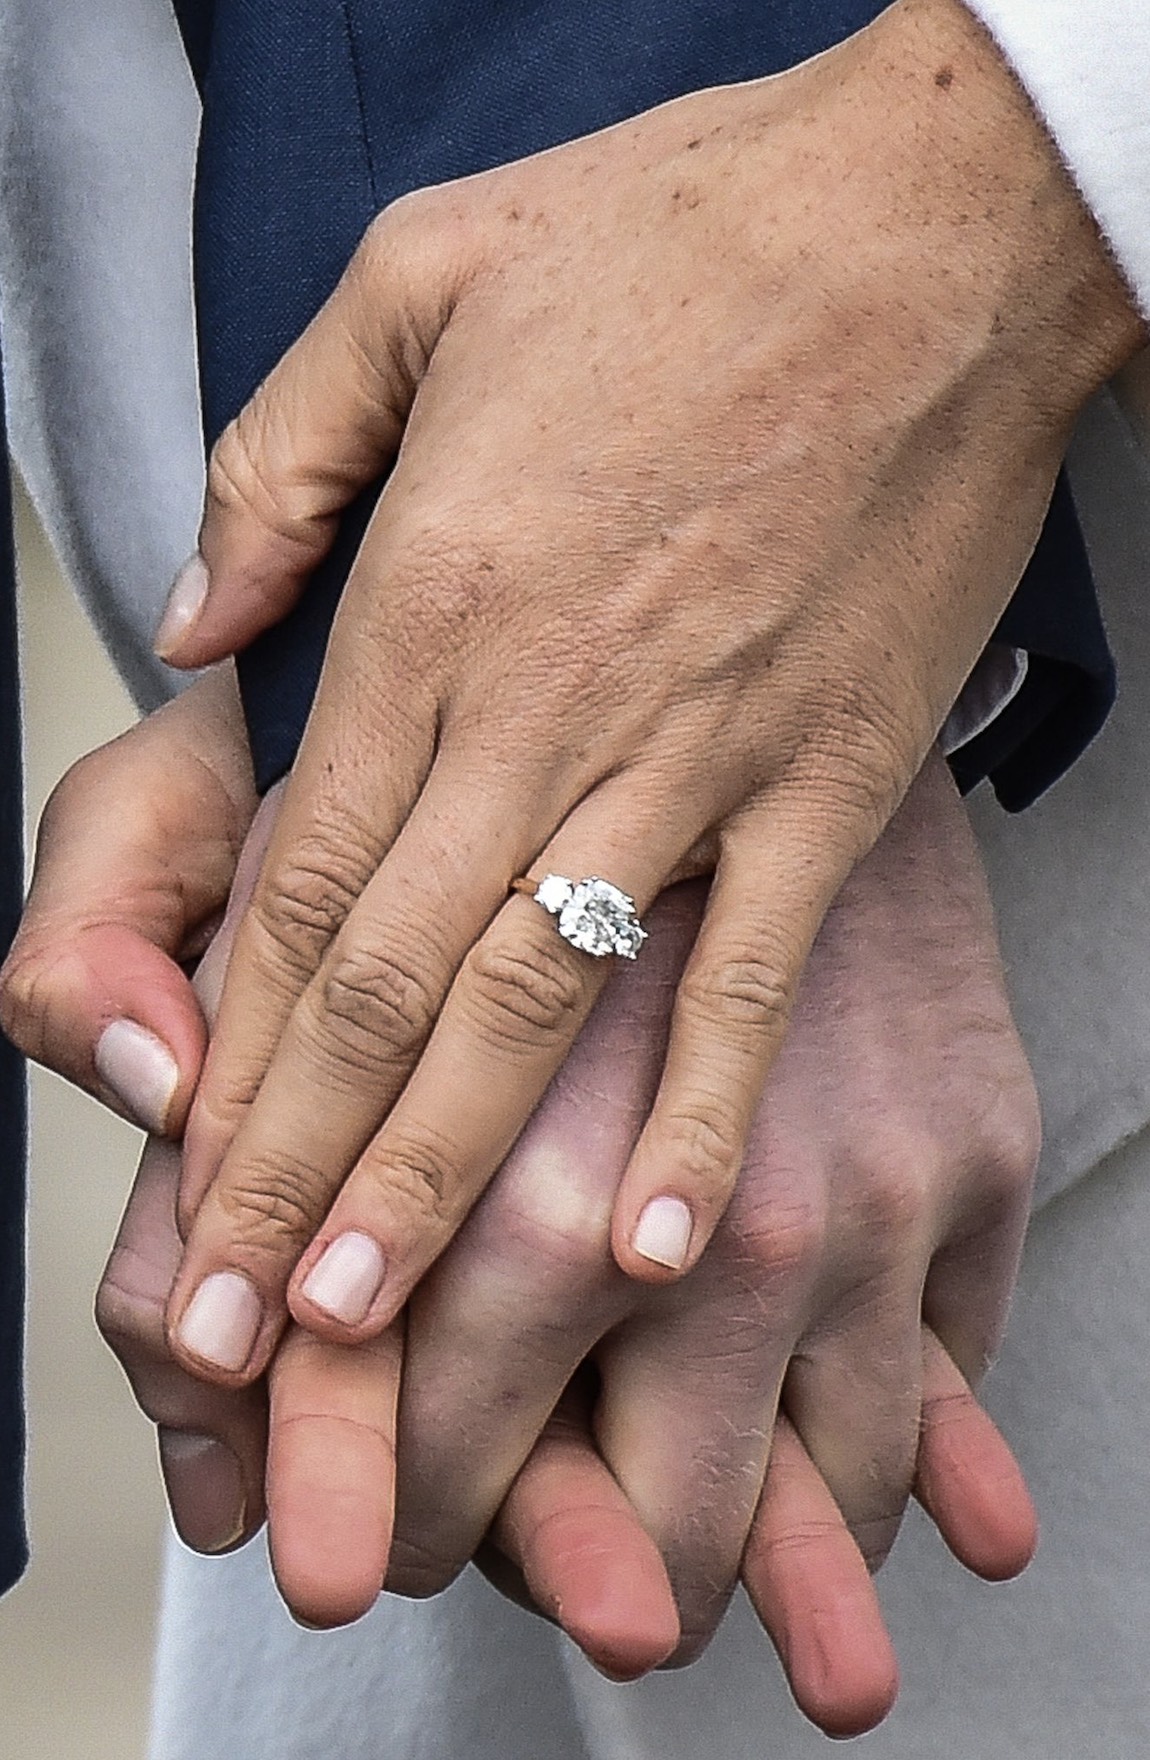 Cleave & Co. Engagement Ring for Meghan Markle made to Prince Harry's specifications featuring a center stone from Botswana flanked by two diamonds from Princess Diana’s personal collection